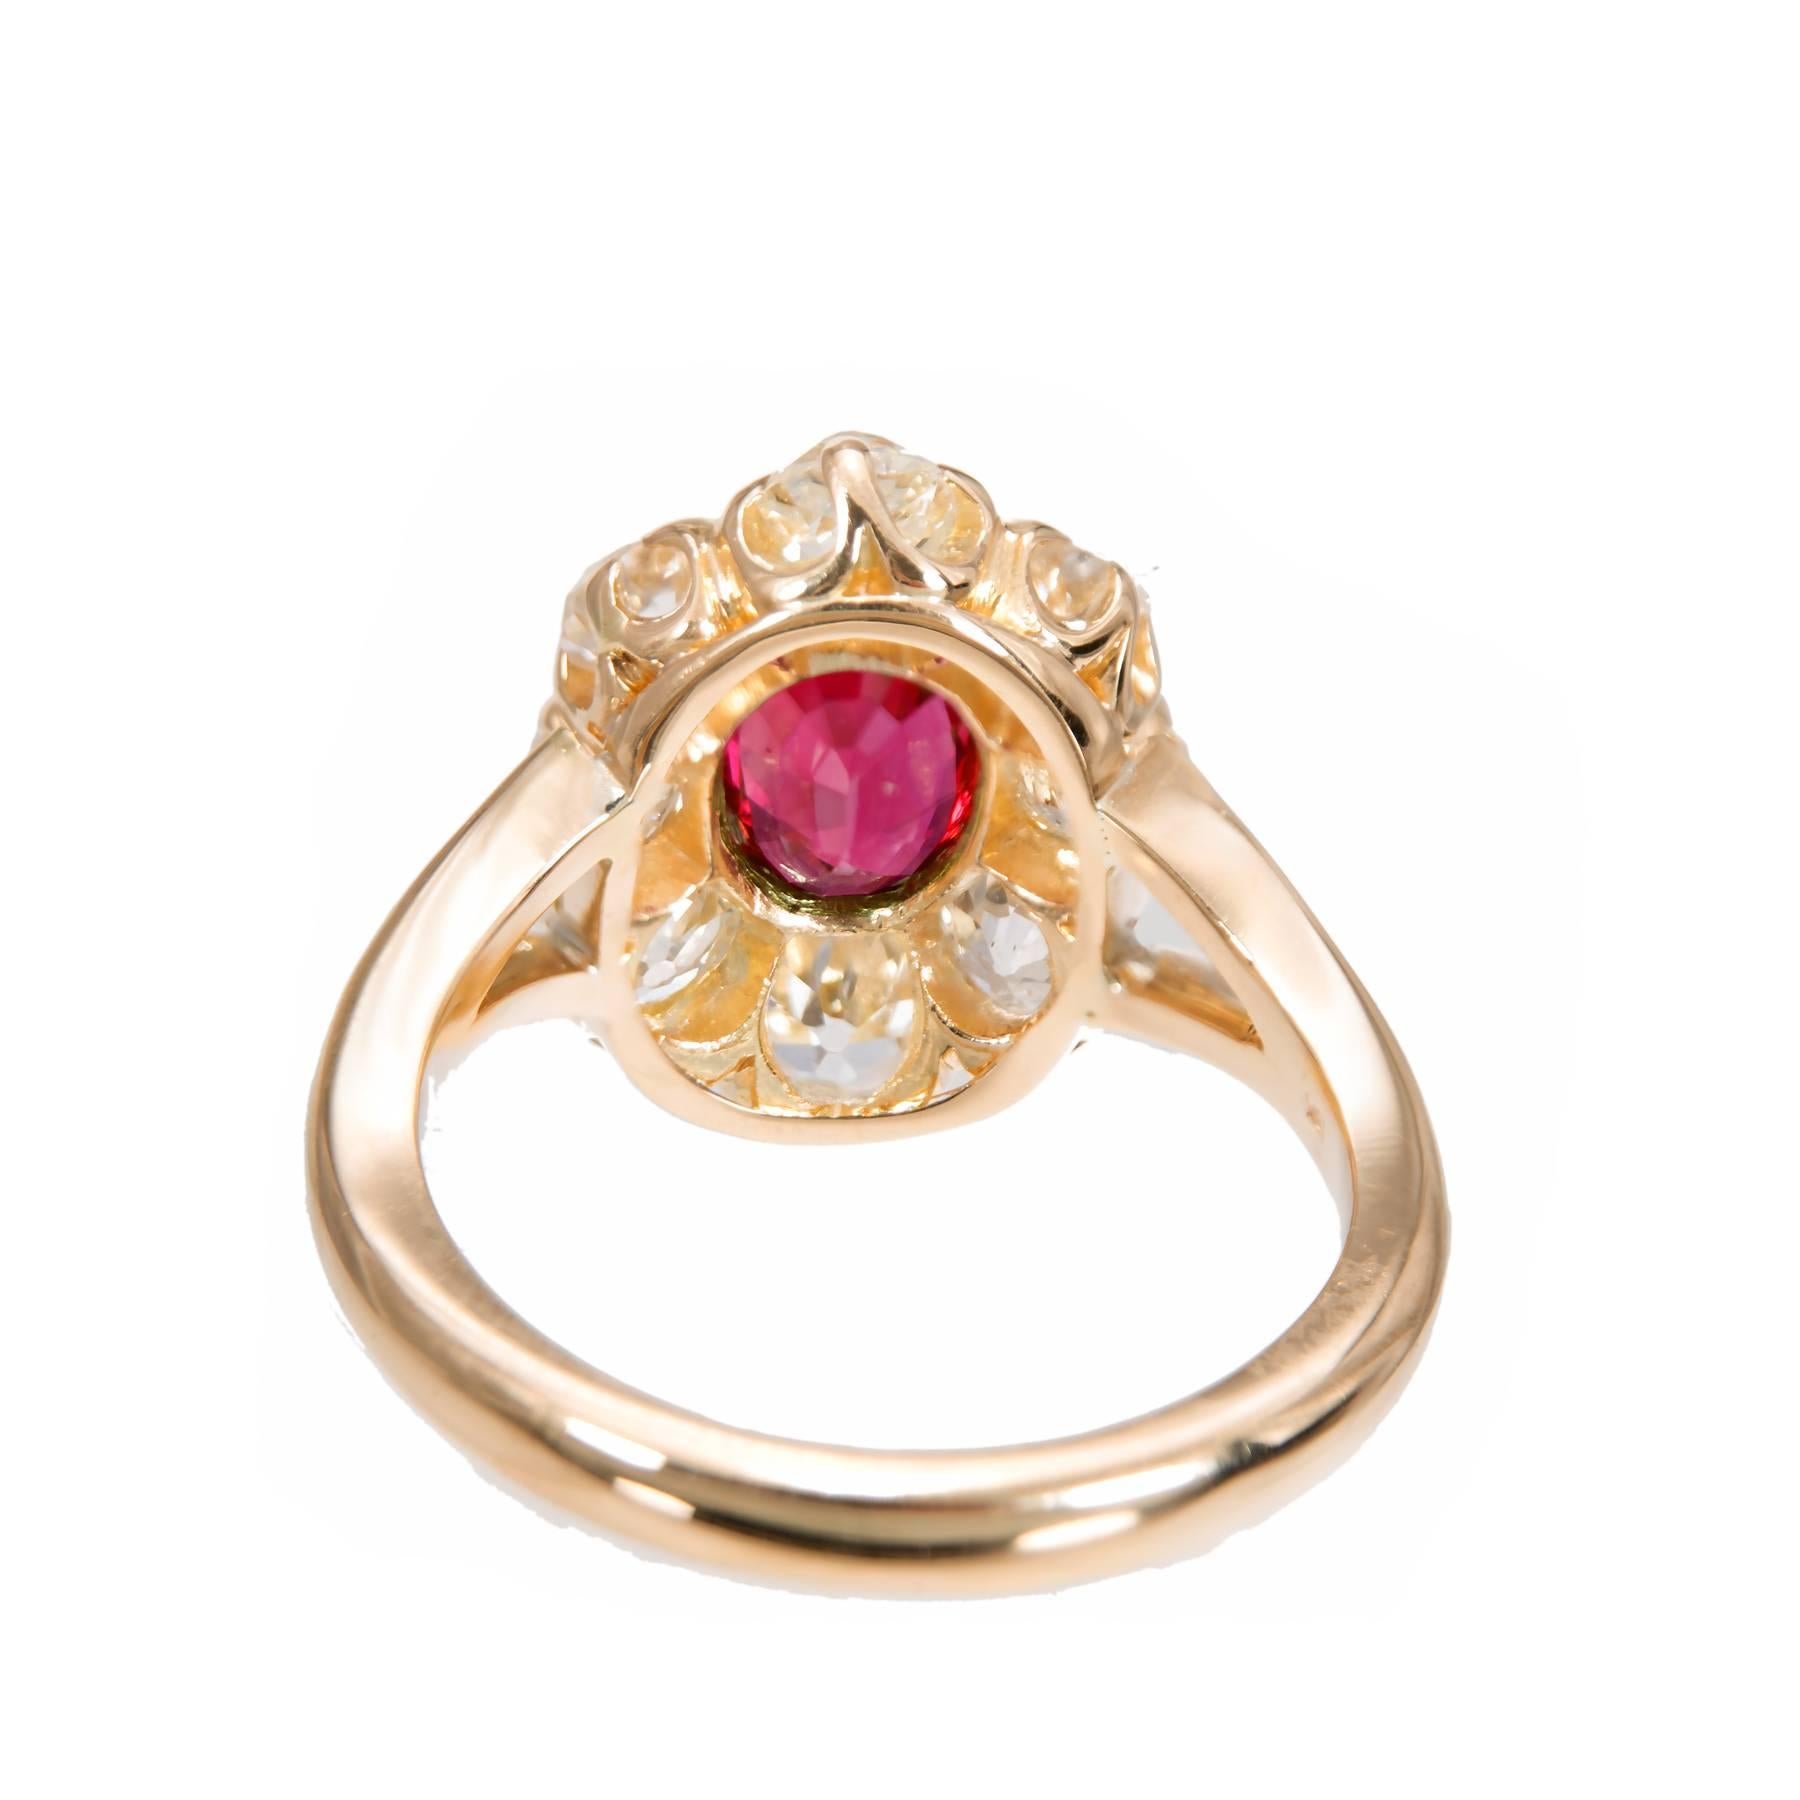 Natural no heat Ruby engagement ring. GIA certified center oval ruby with a halo of 8 old mine cut diamonds in a 18k yellow gold setting. Created in the Peter Suchy Workshop.  

1 oval top gem red Ruby, approx. total weight 1.17cts, SI , natural no